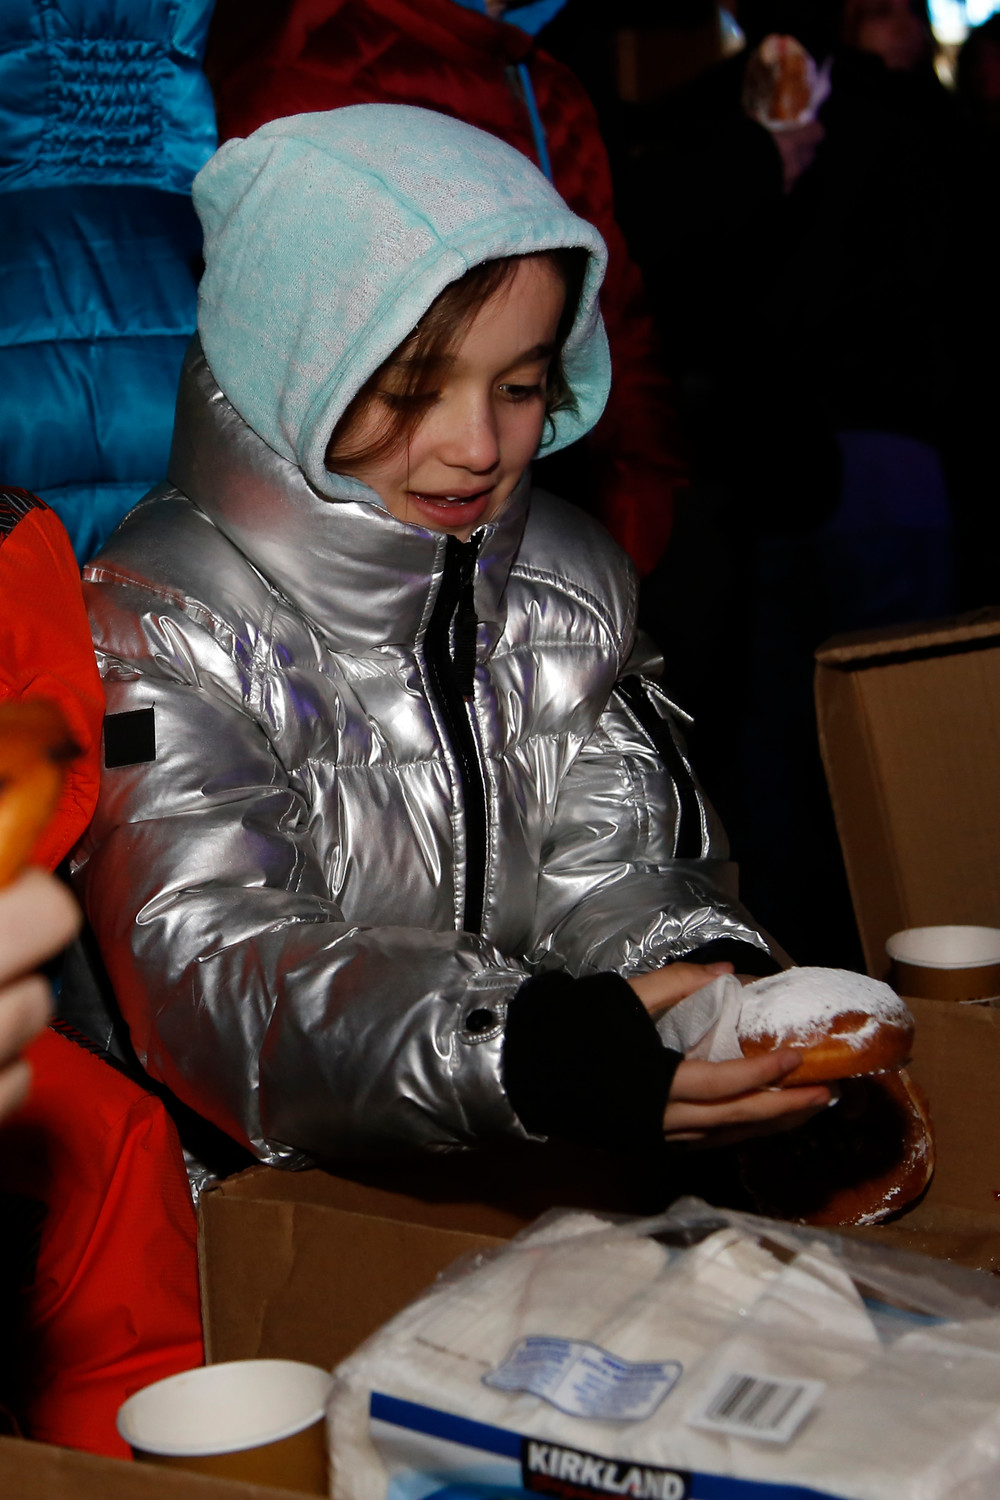 Mikayla Afriat, 10, grabbed one of the last jelly donuts.